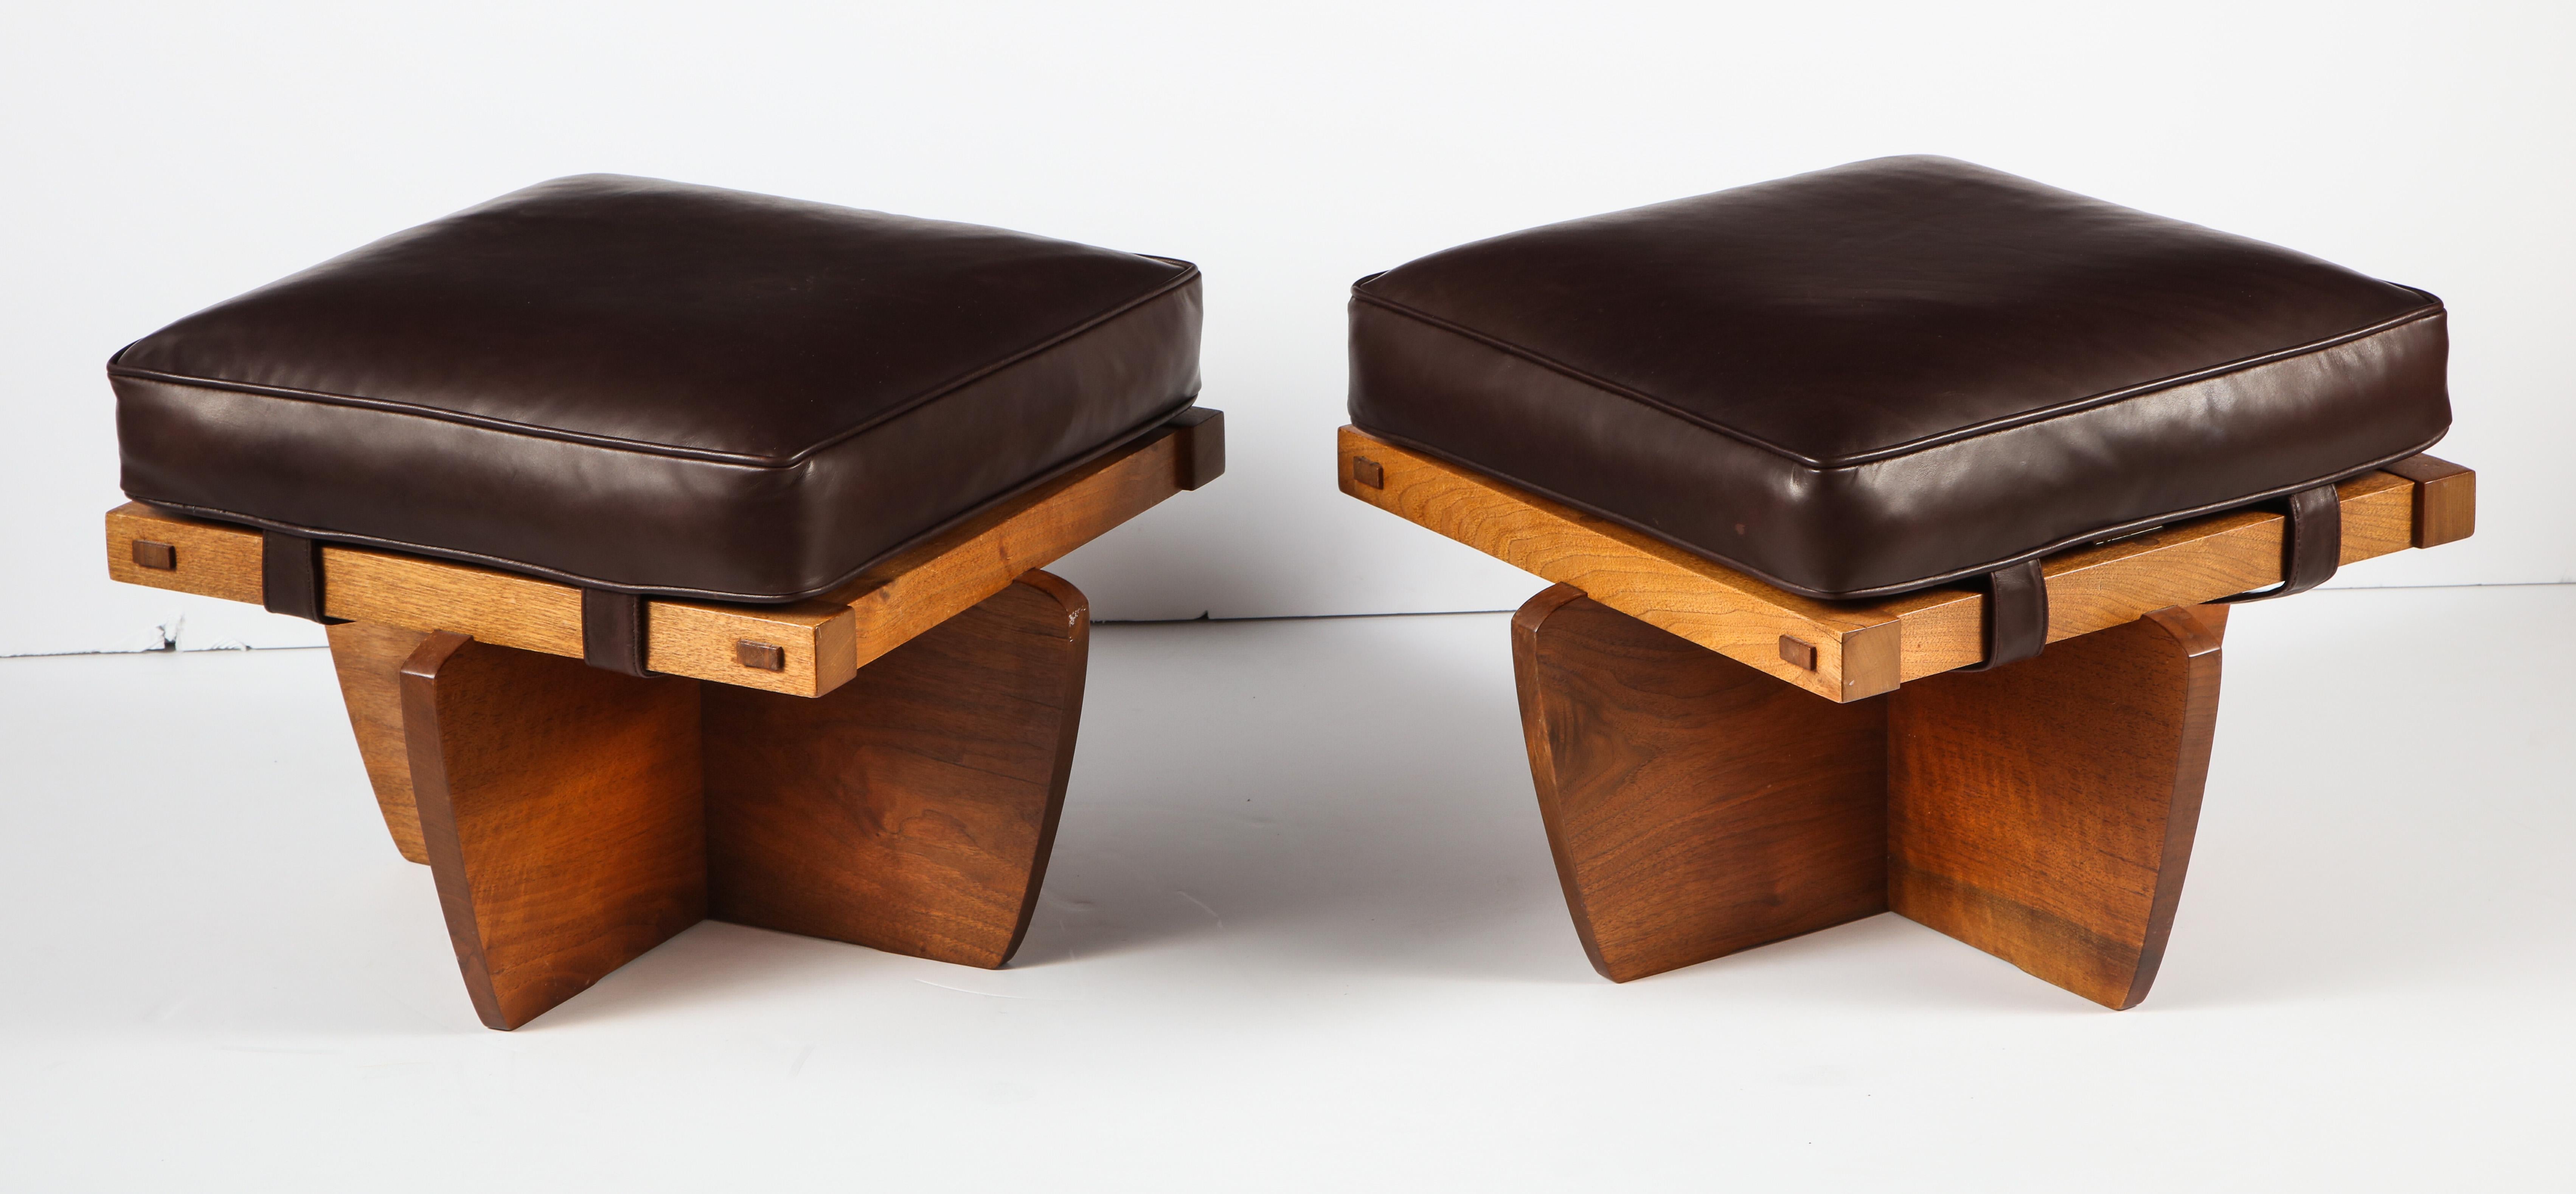 Rare and wonderful these ottoman or stools have Nakashima's very distinctive conoid base.